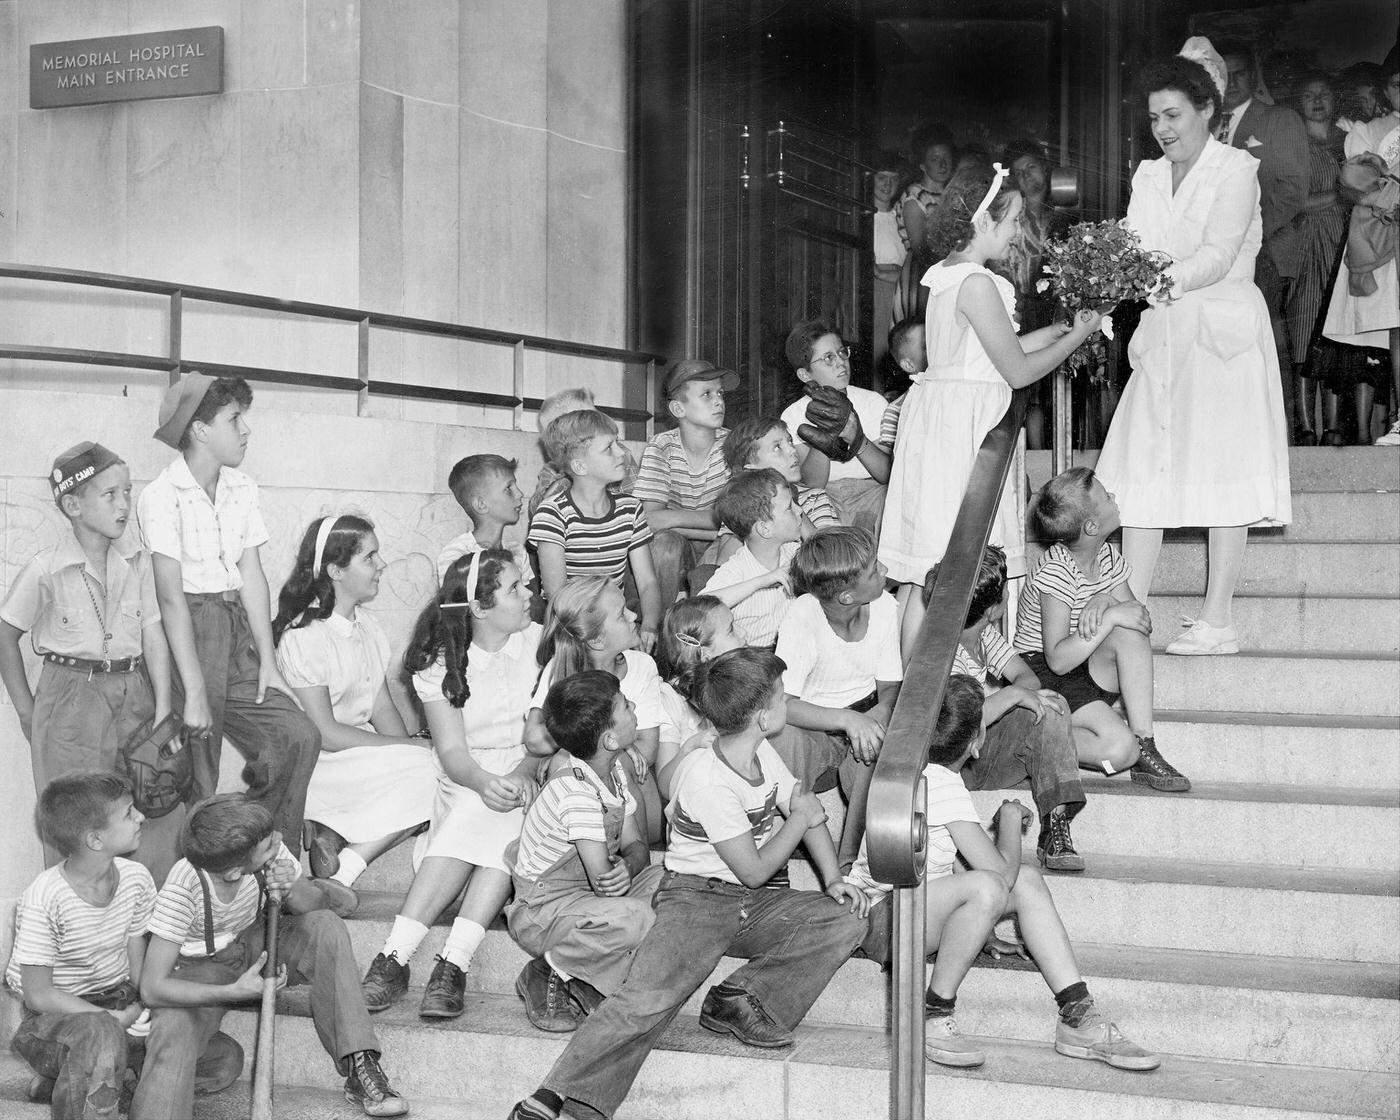 Sad Faced Kids Watch Marian Duffy Give Bouquet To Nurse For Ailing Babe Ruth At Memorial Hospital, Manhattan, 1945